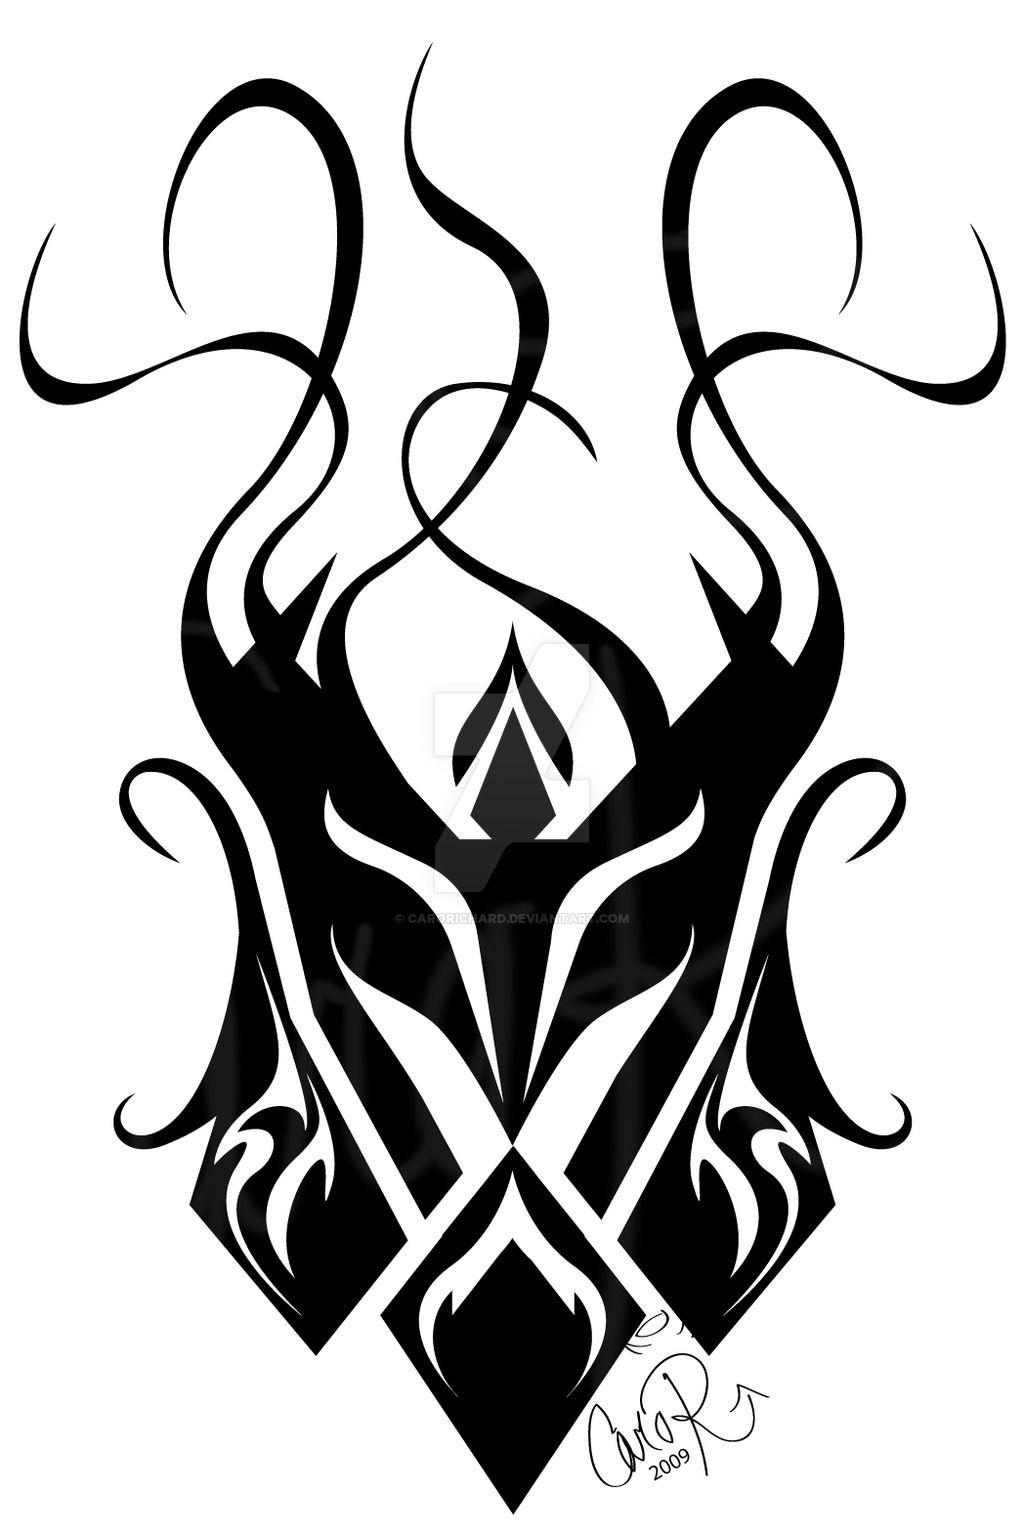 Black and White Transformers Logo - Another transformer logo